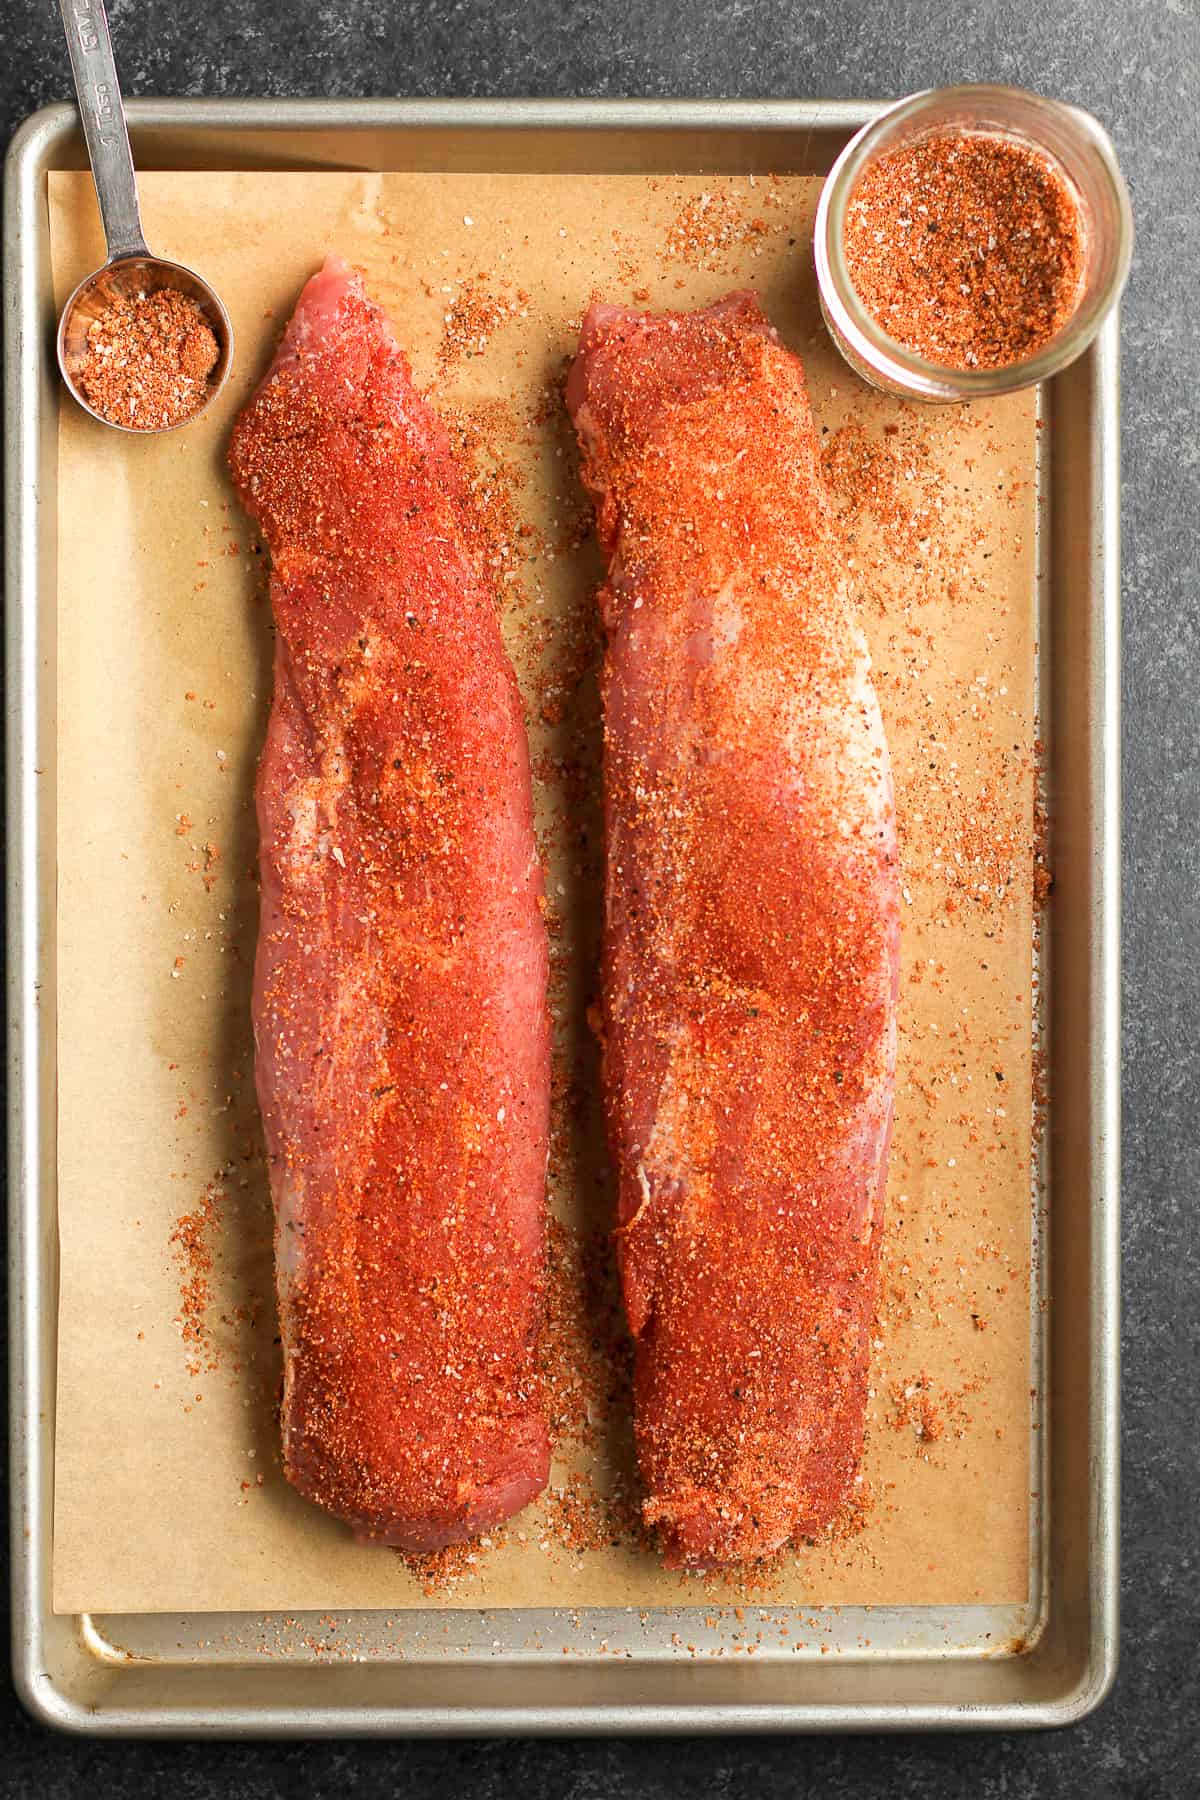 The baking sheet with the raw pork tenderloin topped with the dry rub seasoning.